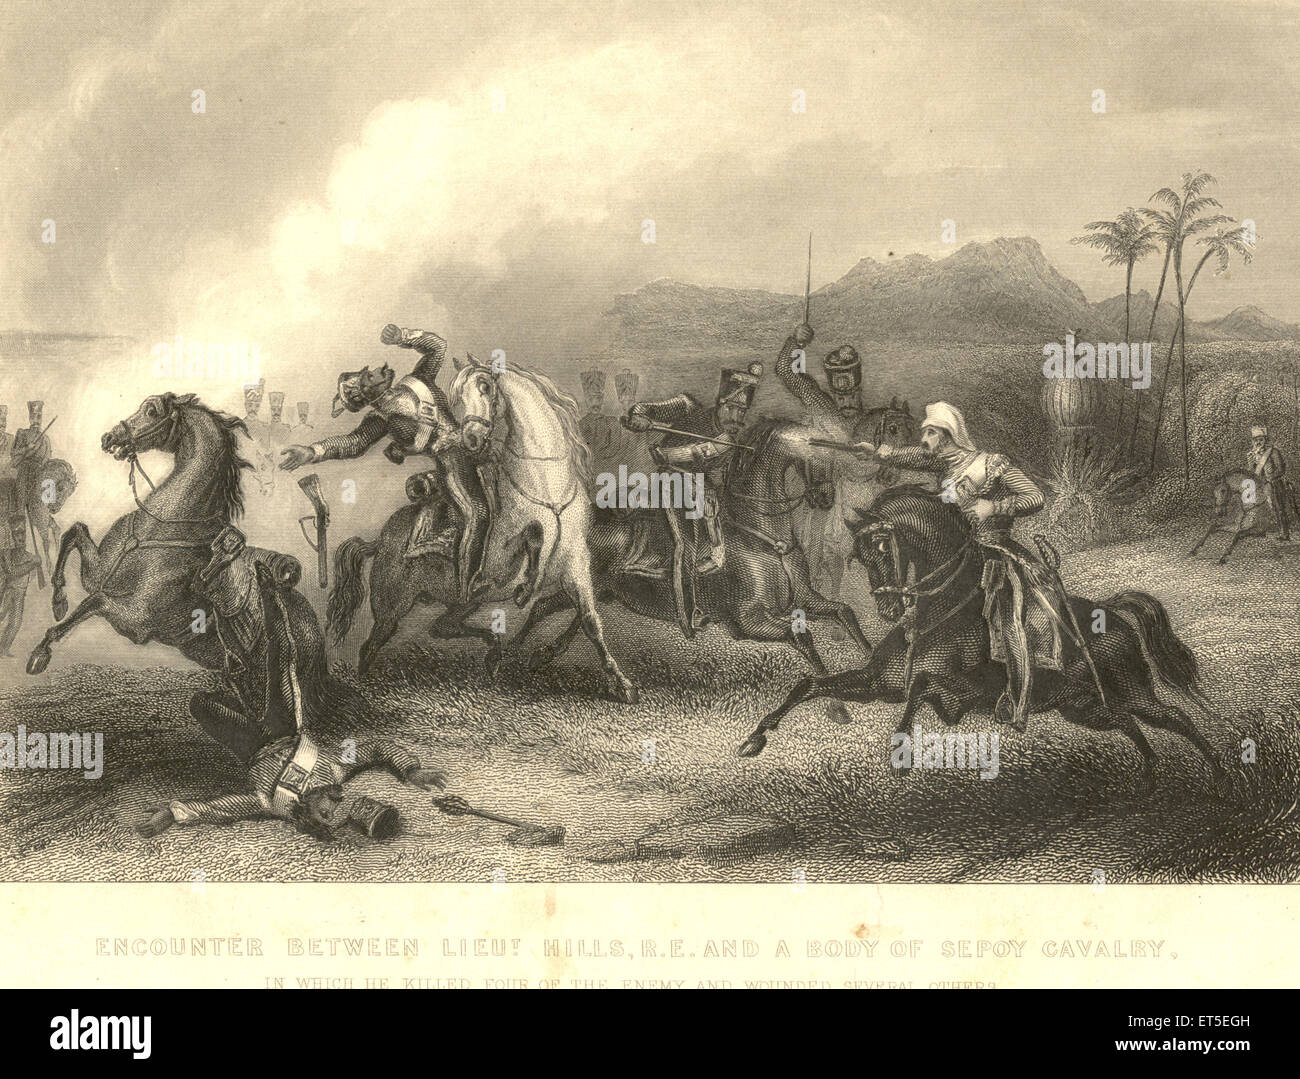 Military and munity mutiny views encounter between Lieut Hills RE and body sepoy soldier cavalry ; India Stock Photo